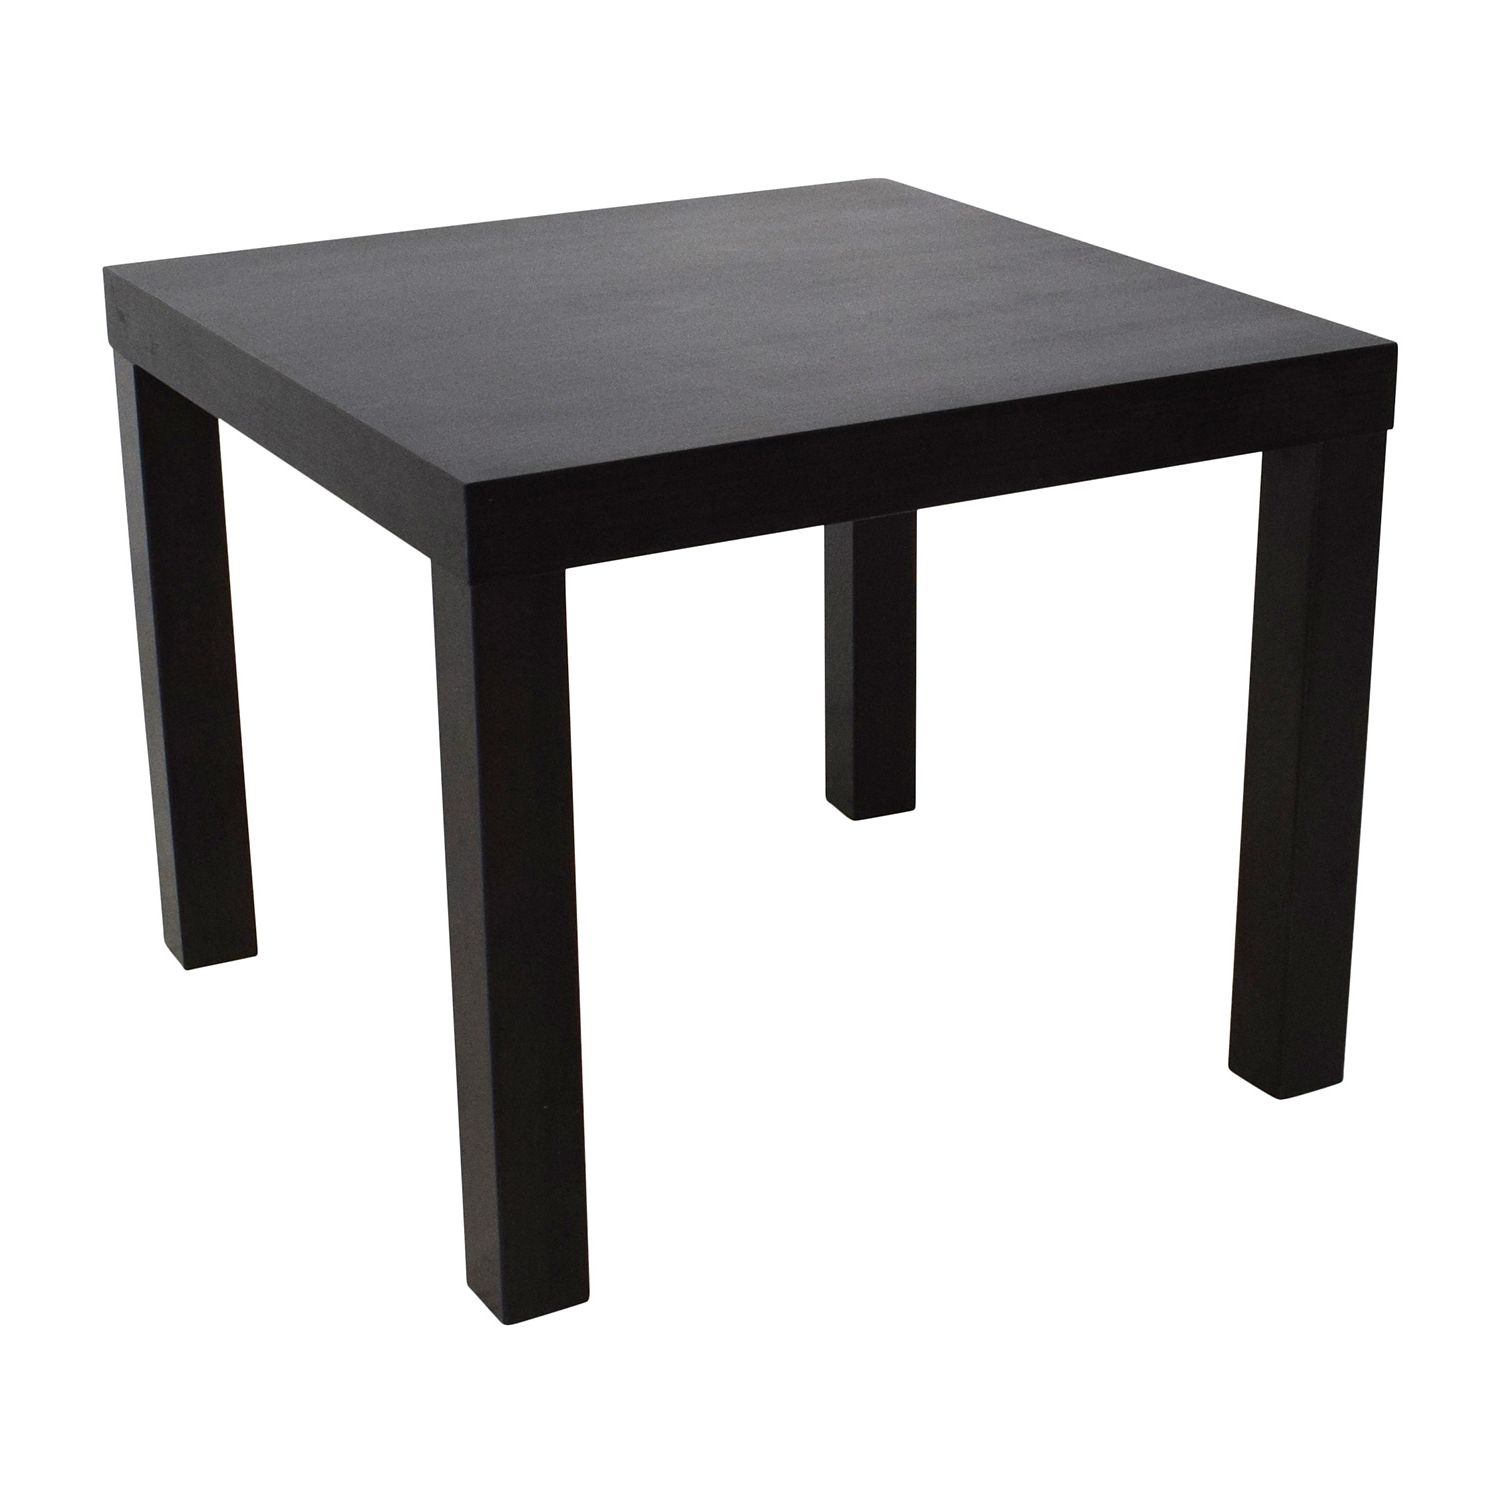 [%popular Black And White Coffee Tables In 80% Off – Black Coffee Table / Tables|80% Off – Black Coffee Table / Tables Inside 2020 Black And White Coffee Tables%] (View 14 of 20)